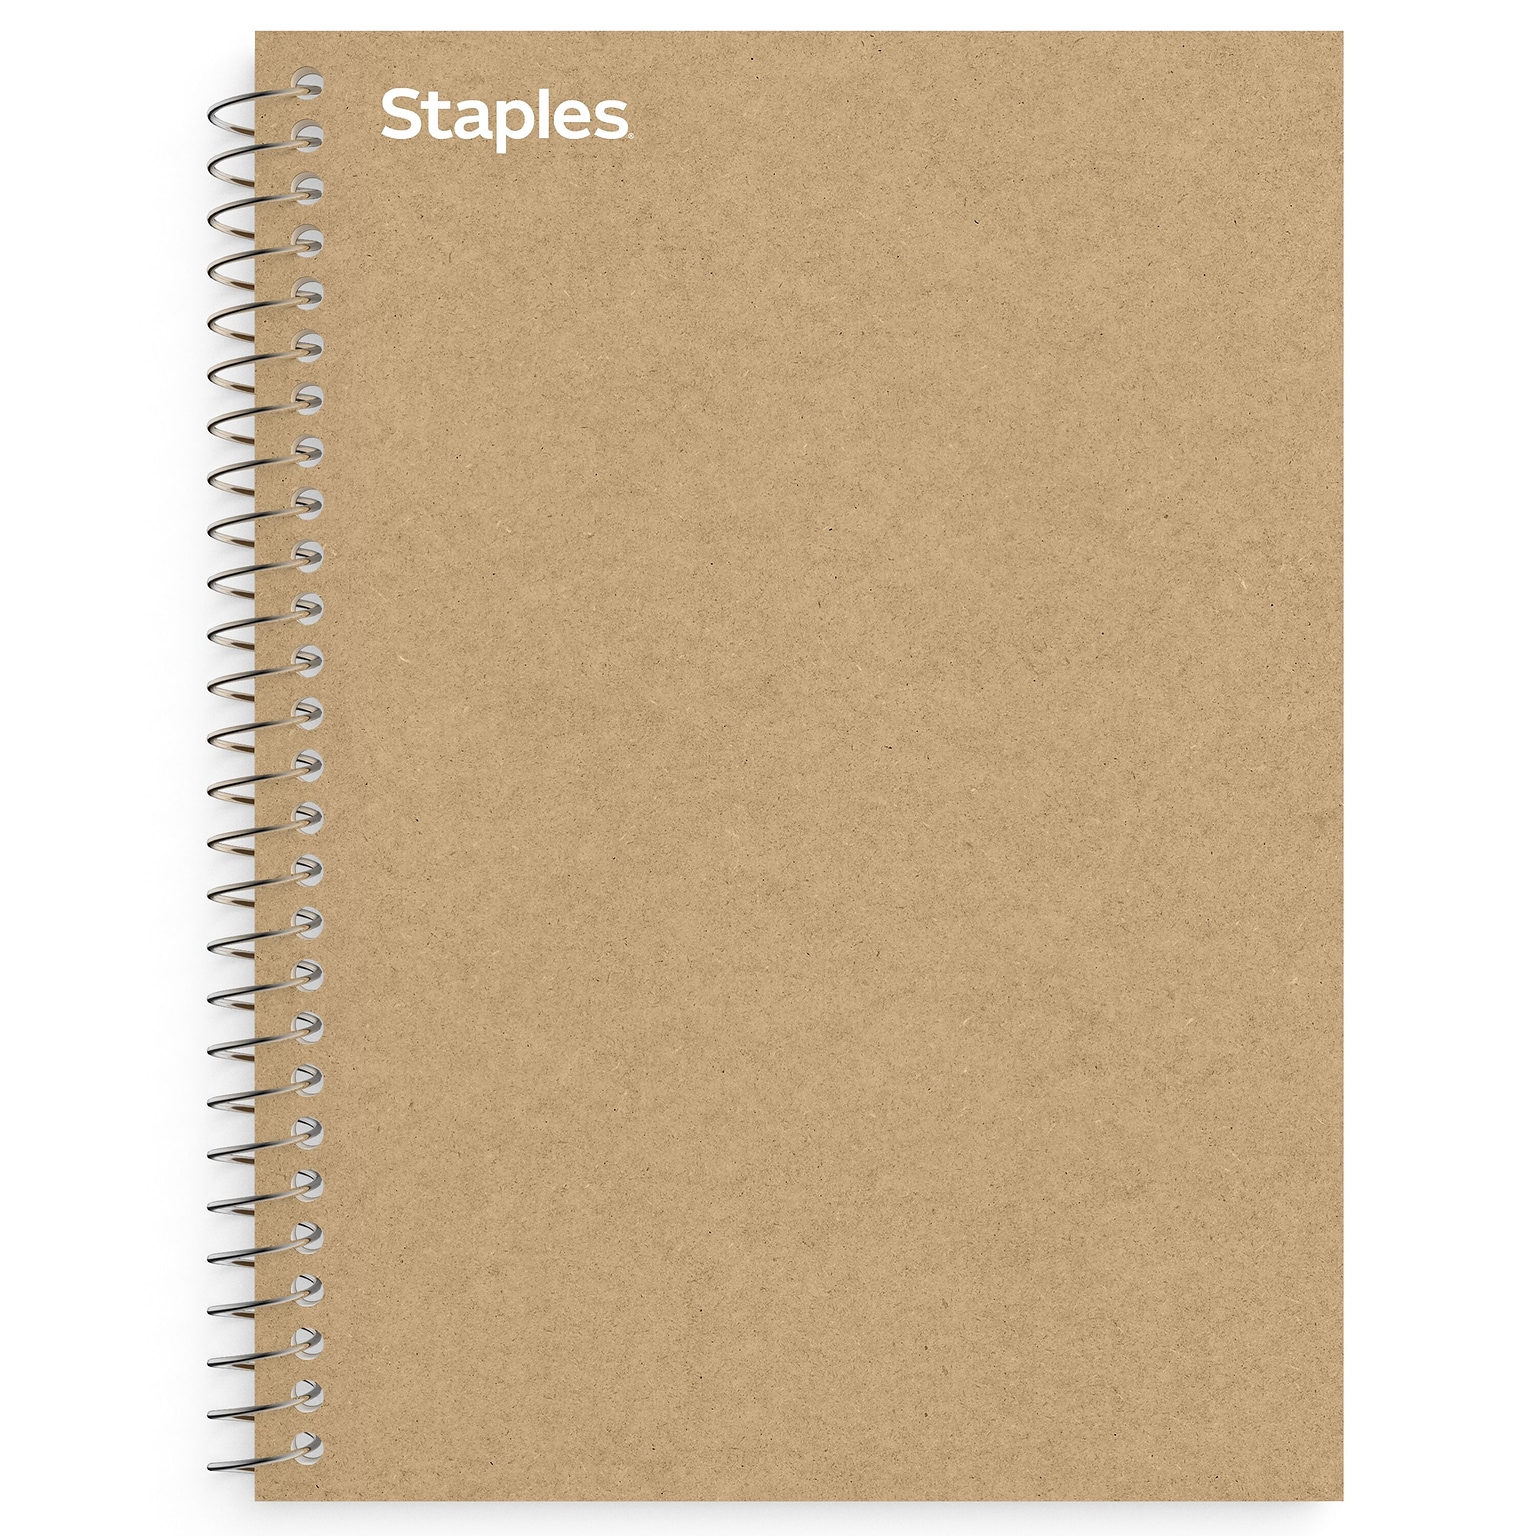 Staples Premium 1-Subject Notebook, 5.875 x 9, College Ruled, 100 Sheets, Brown (TR52120)